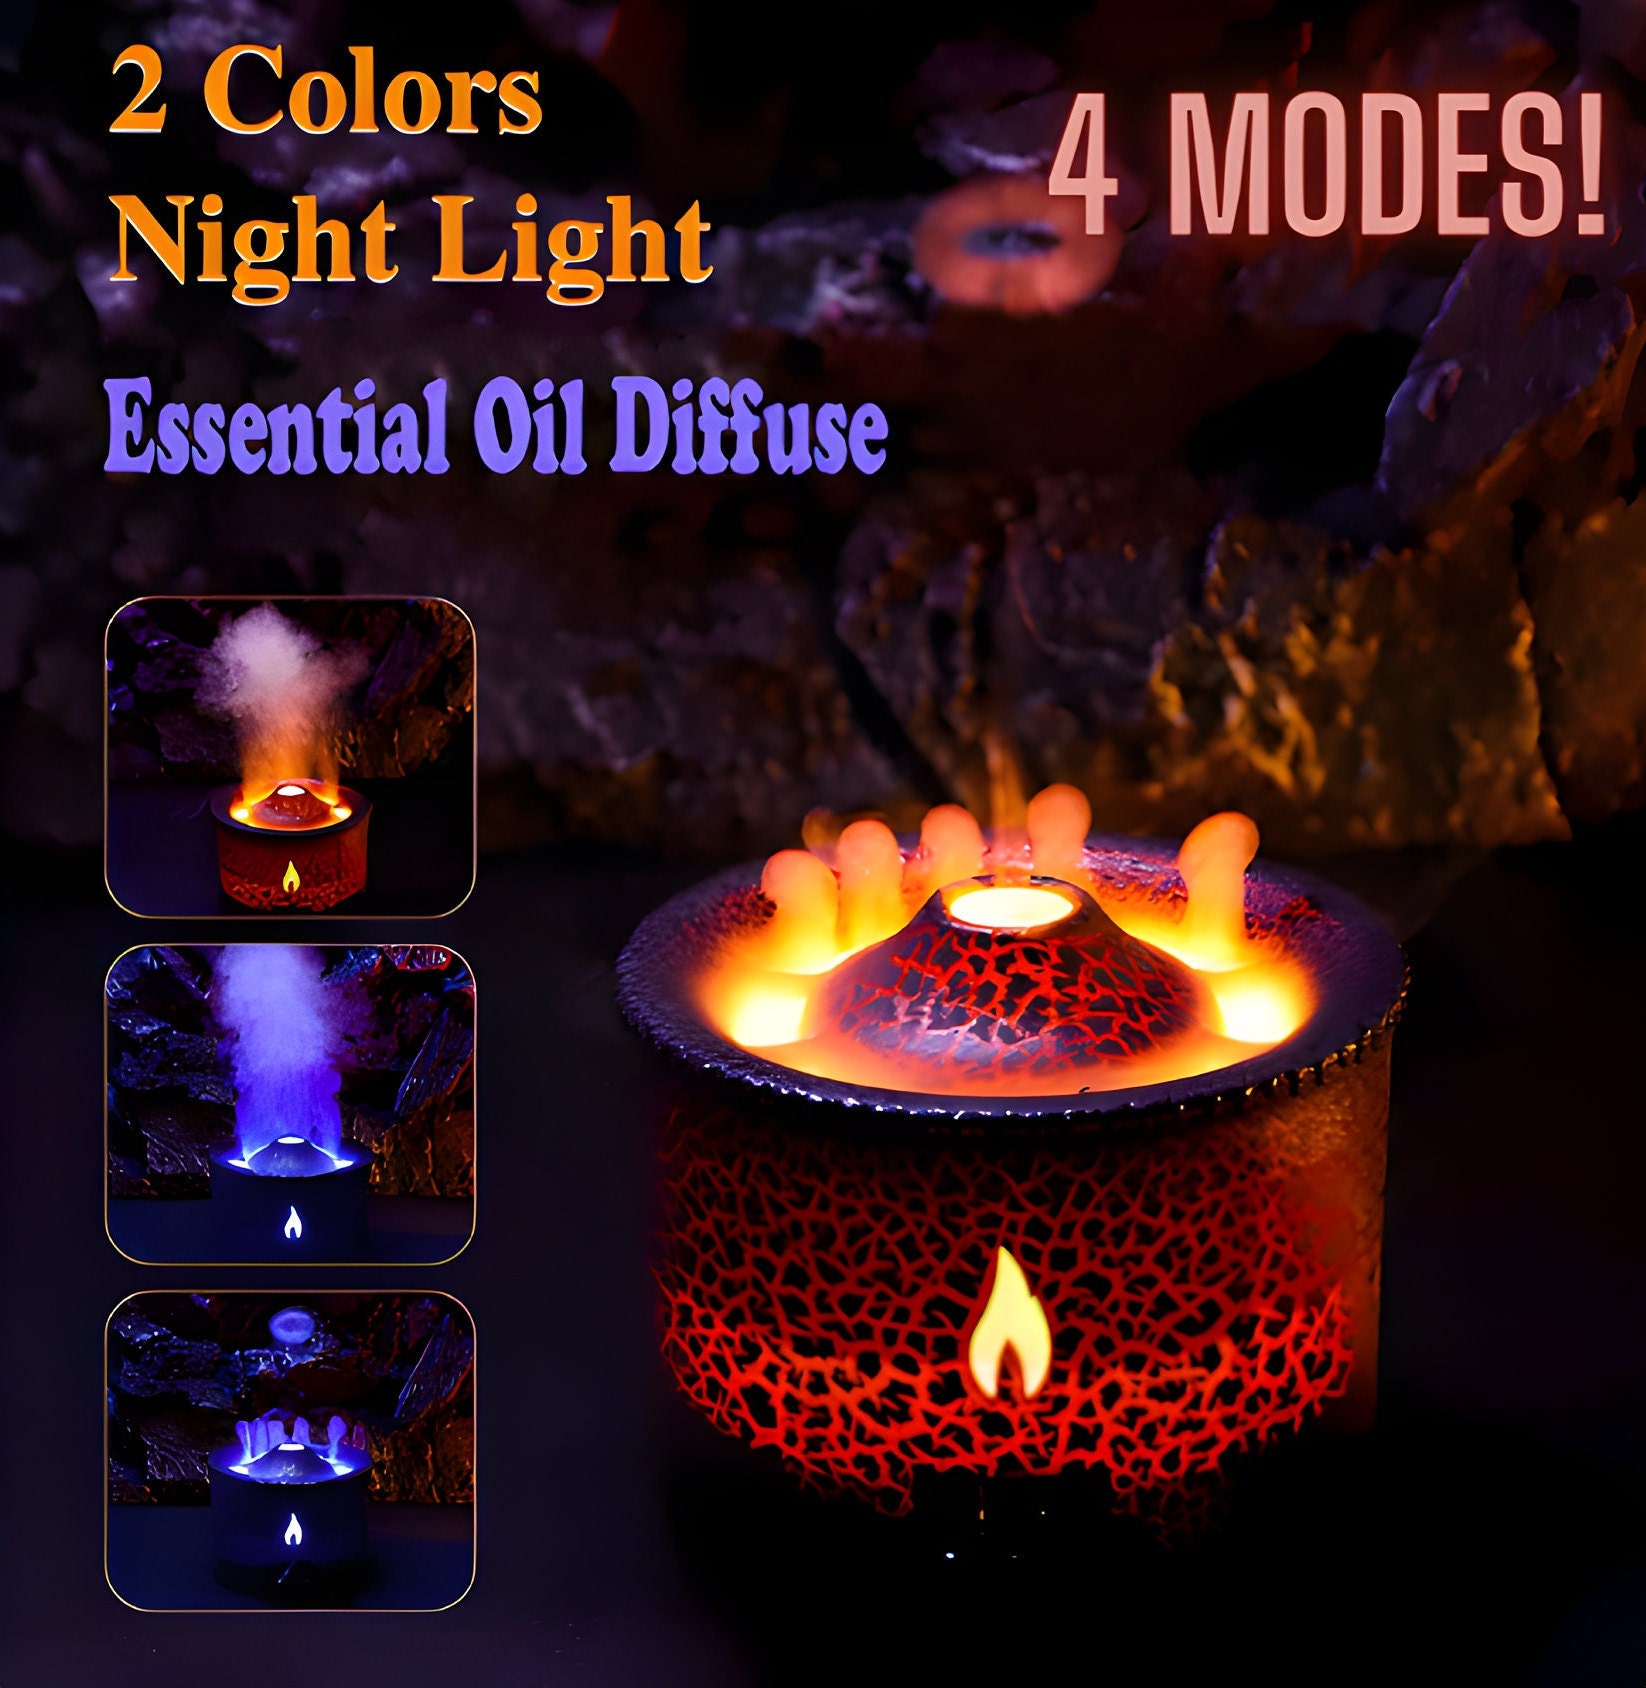 16 Theme Atmosphere Flameless Essential Oil Sets